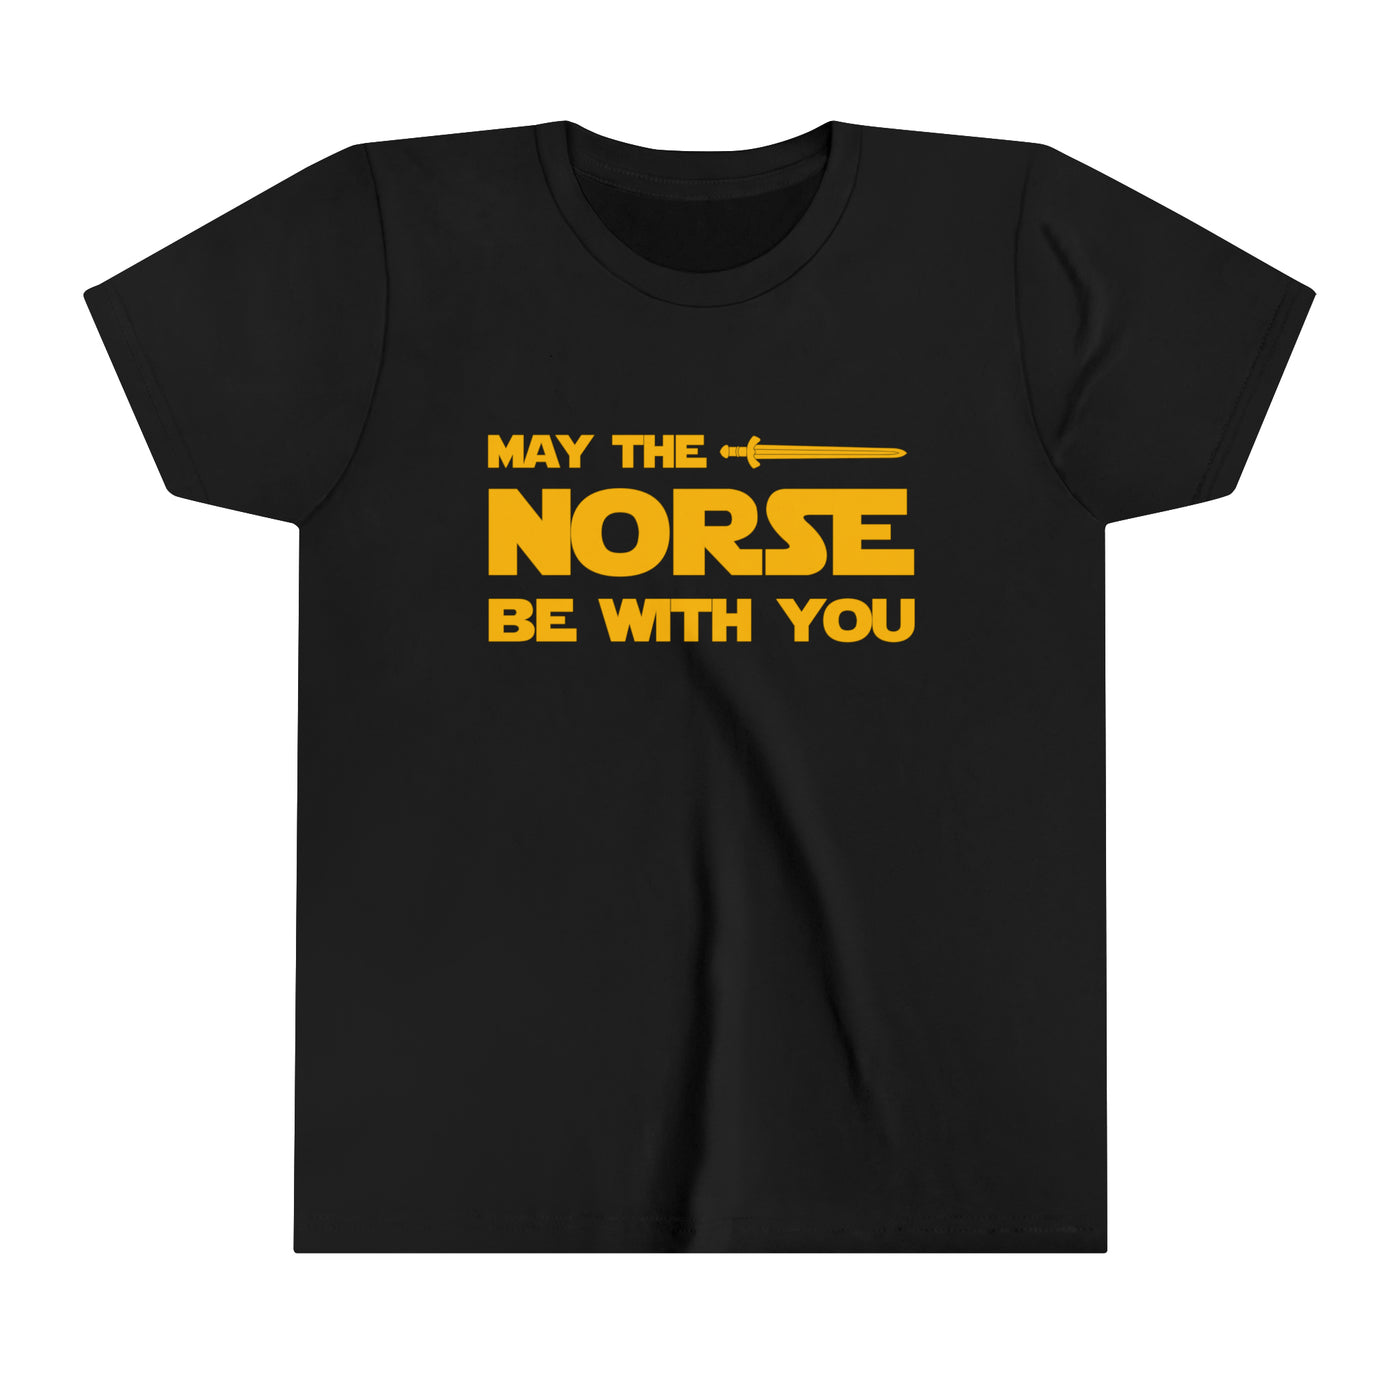 May The Norse Be With You Kids T-Shirt